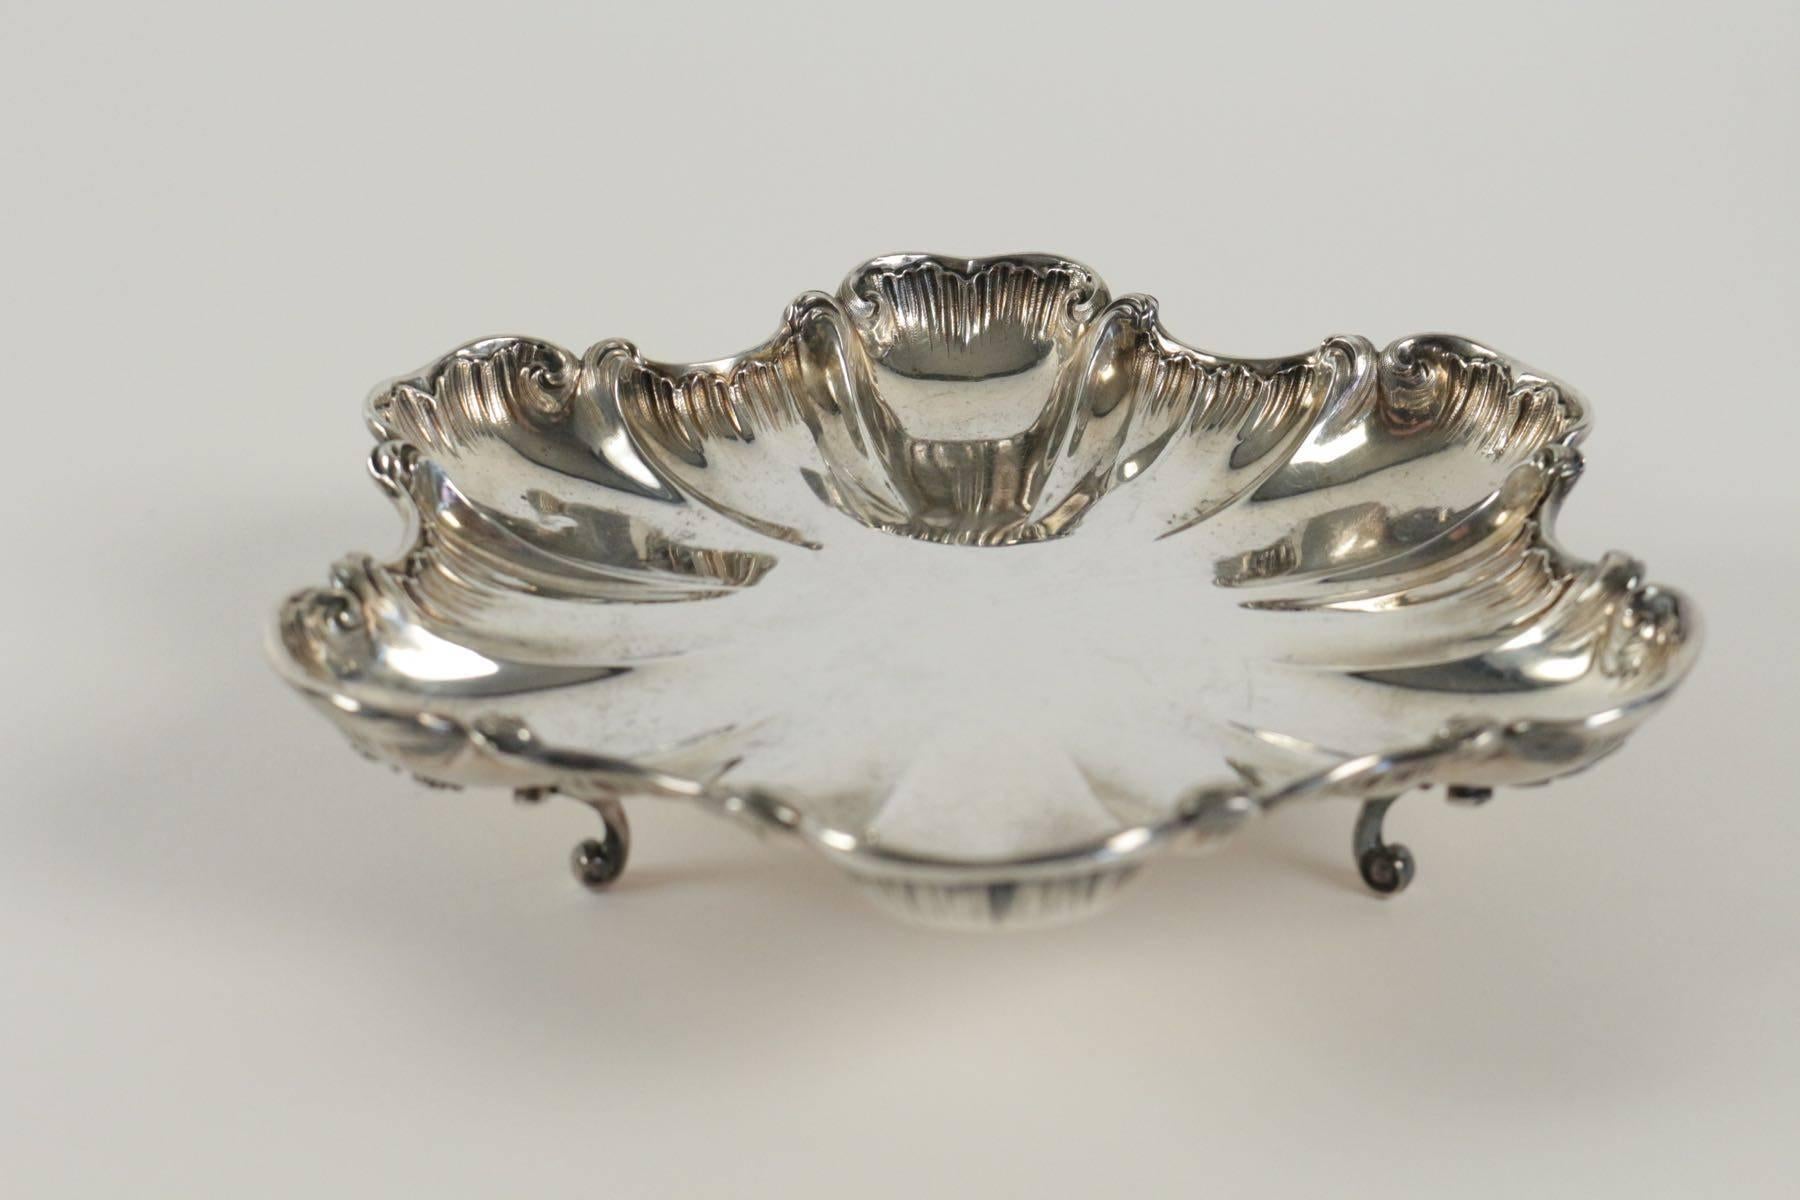 Pair of French solid silver dishes decorated with draperies, resting on three feet.
Weight: 636 g
poinçon: minerve since 1839 French silver mark
circa 1860-1880.